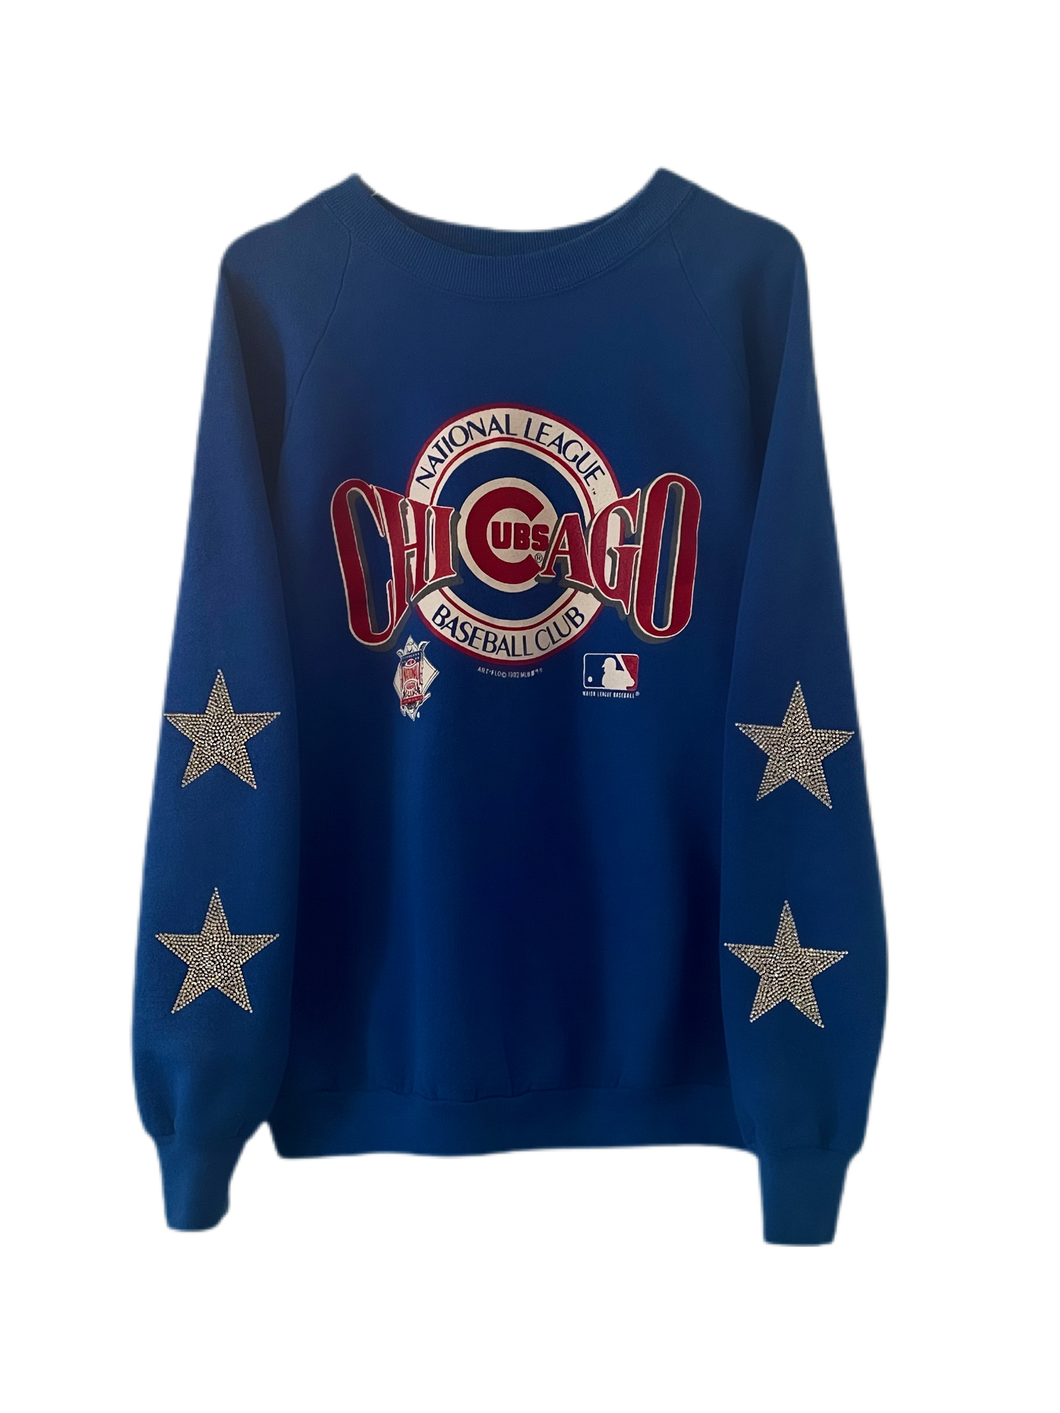 Chicago Cubs, Baseball One of a KIND Vintage Sweatshirt with Crystal Star Design